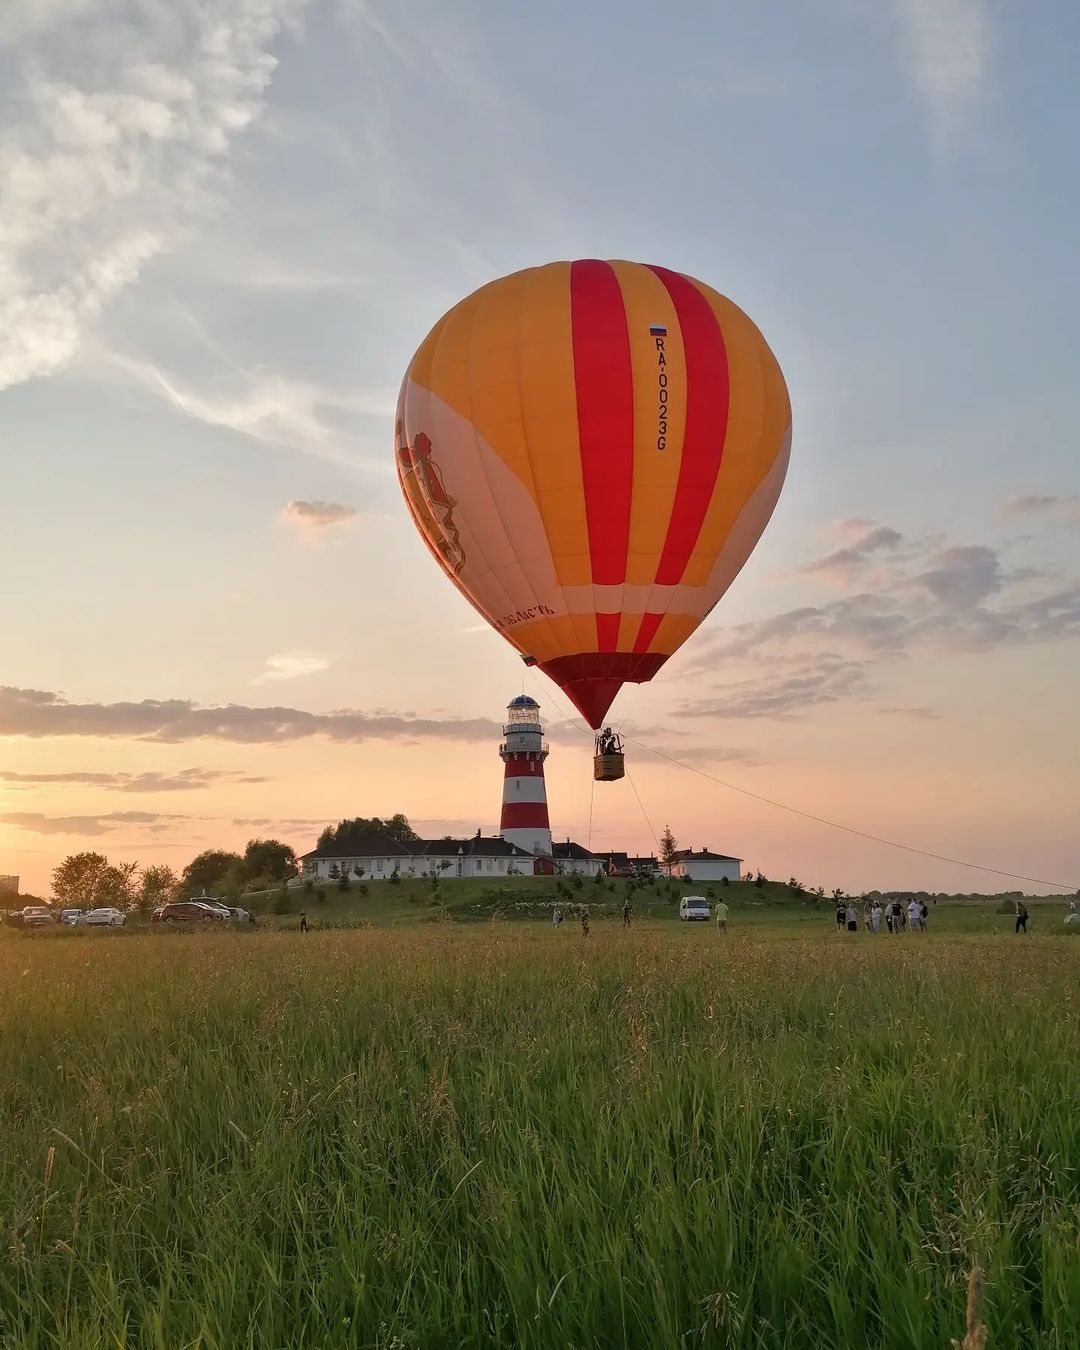 Romantic Hot Air Balloon Ride  is a memorable experience